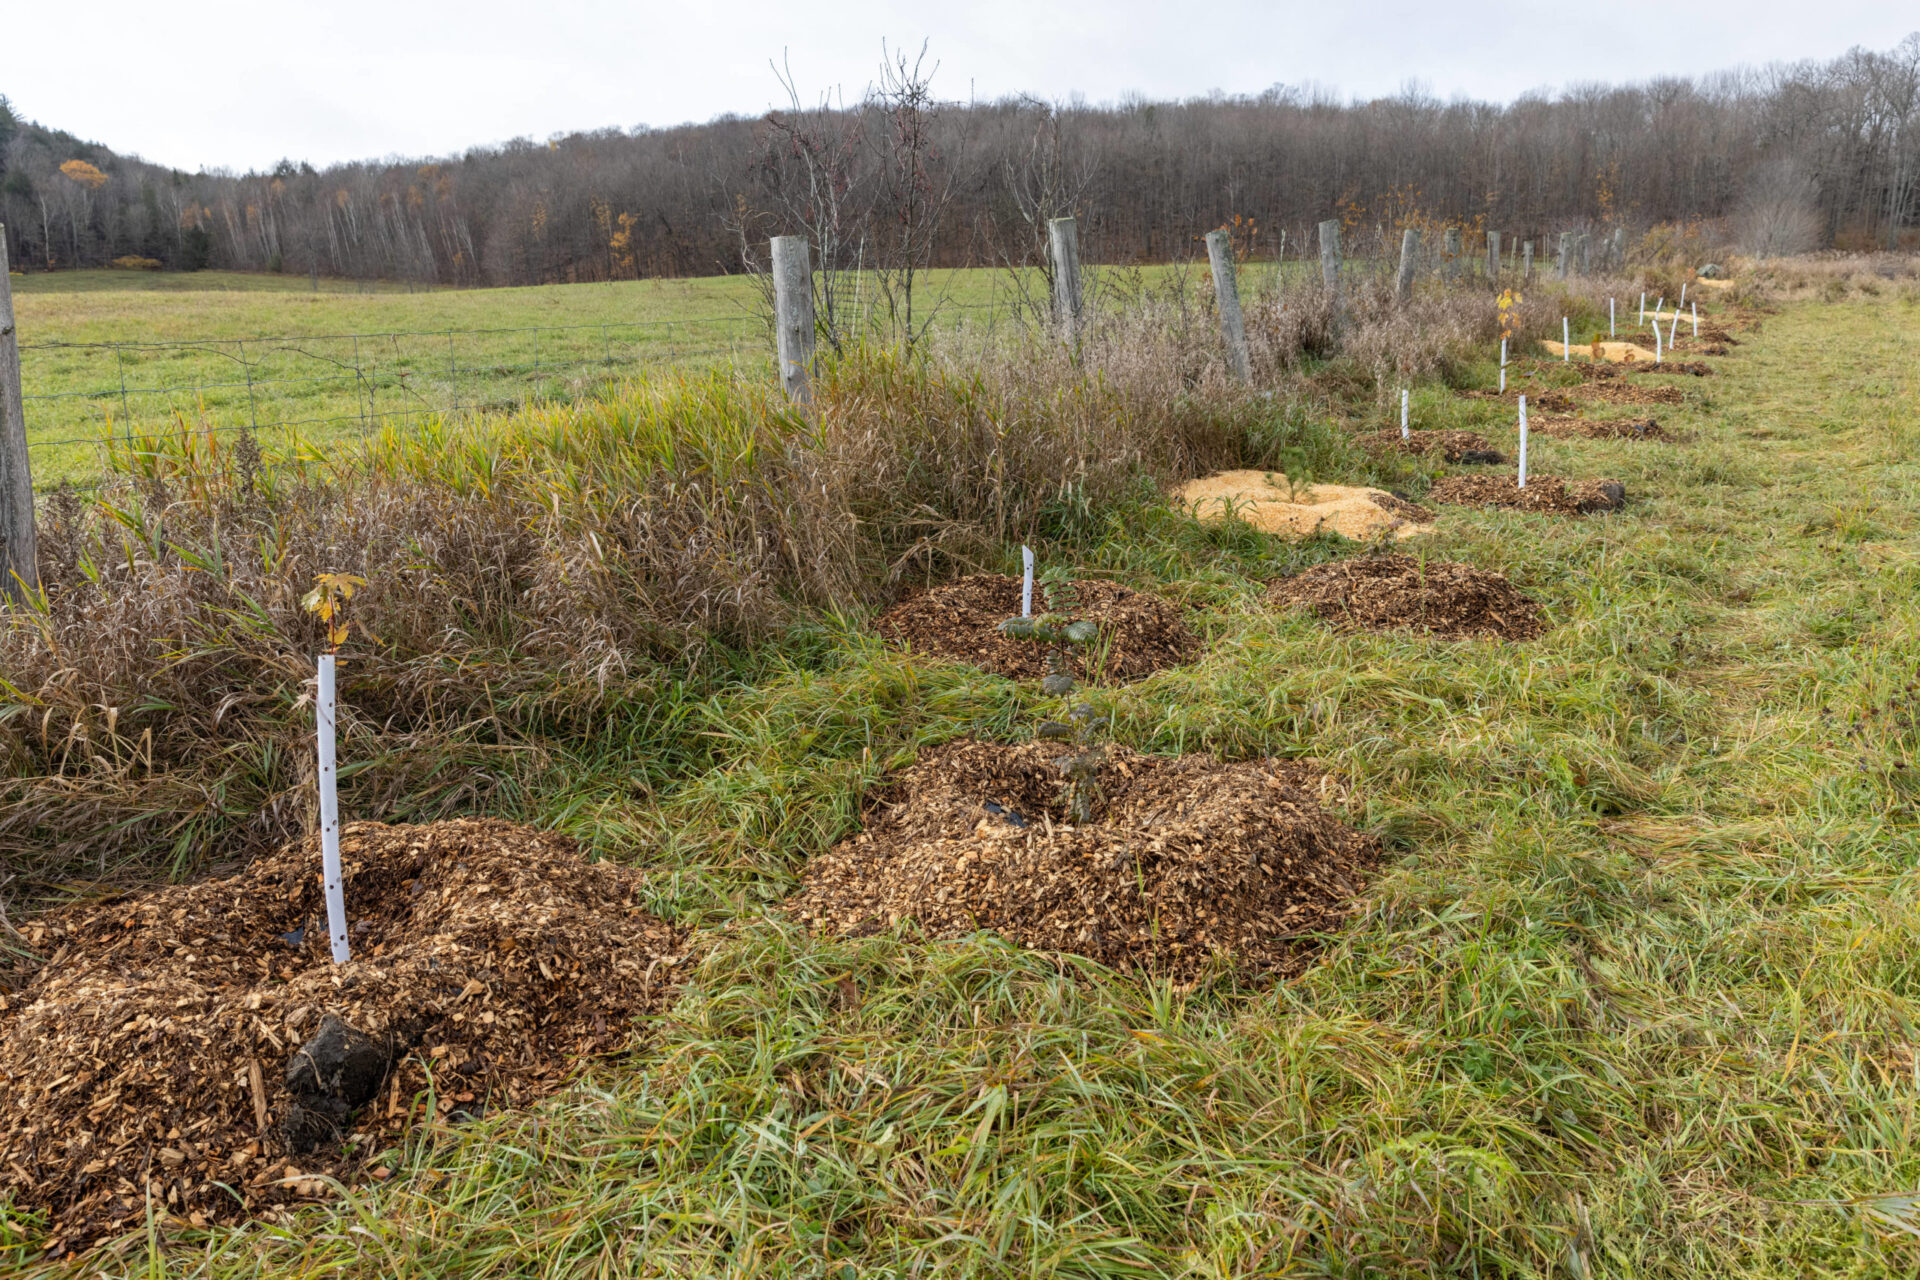 Photos of Ian McClatchy from the Rupert Hill Farm with his tree planting project.